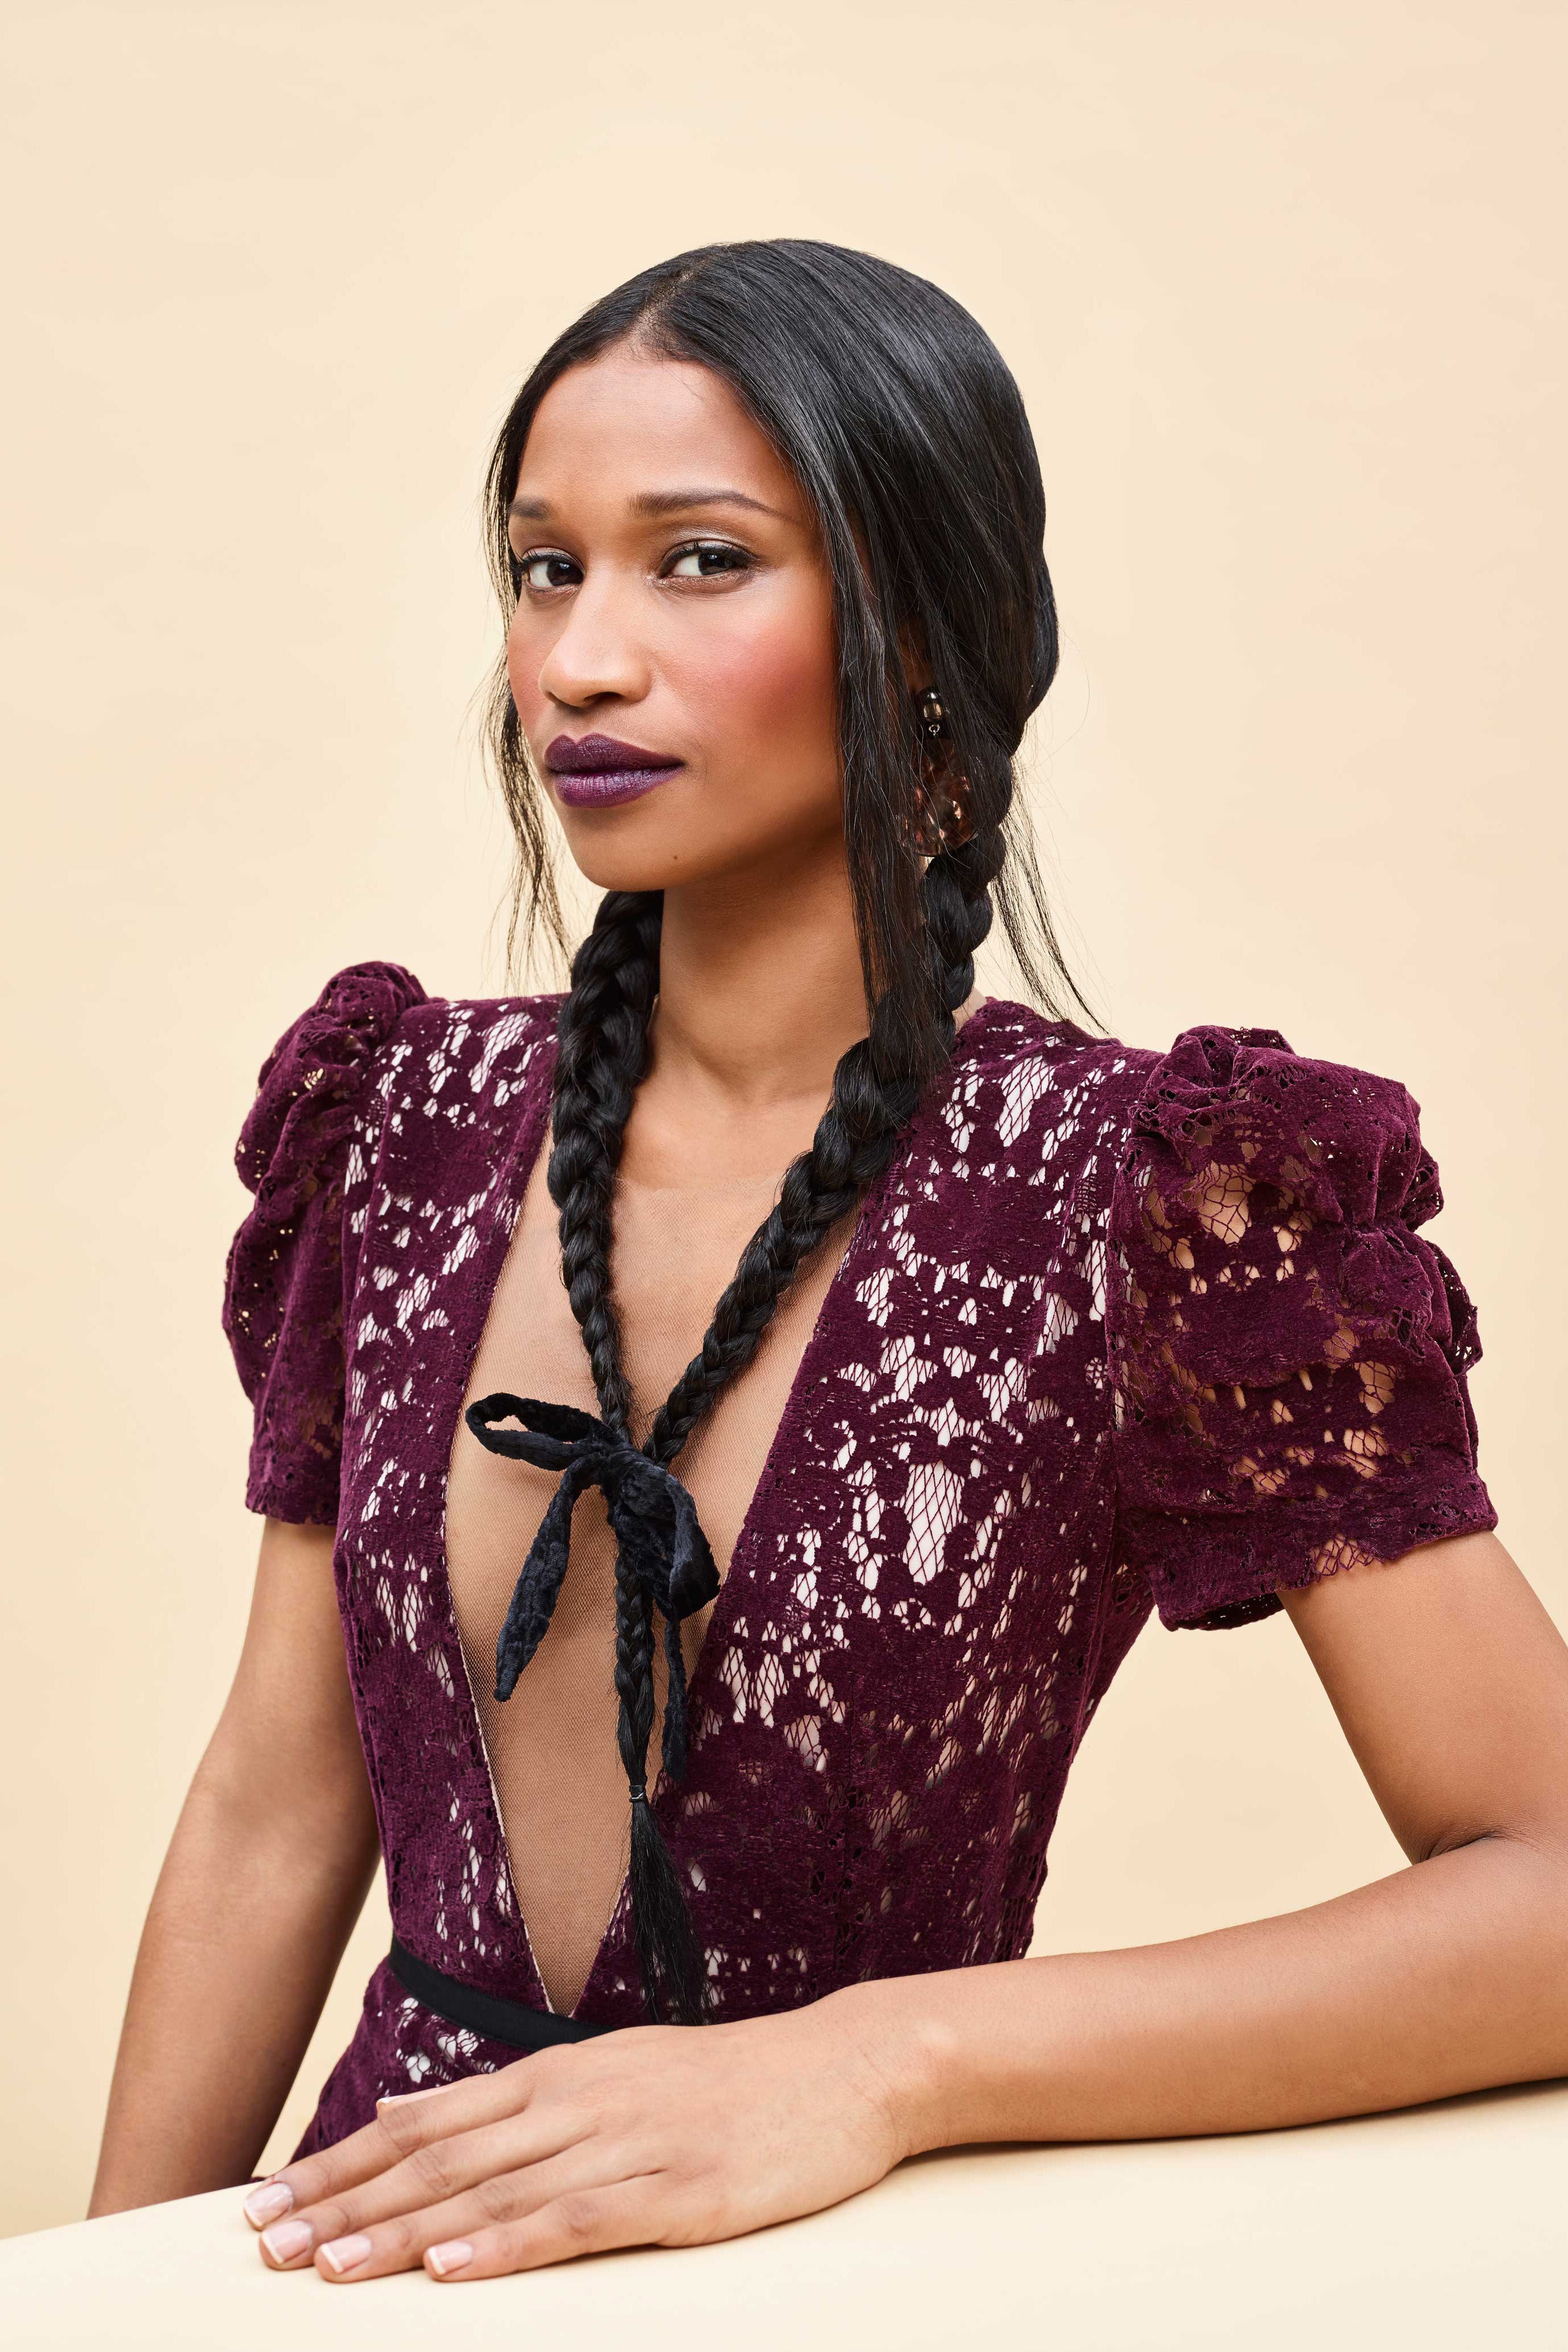 Trending Tresses: 4 Runway-Ready Hairstyles You'll Be Seeing This Fall 
